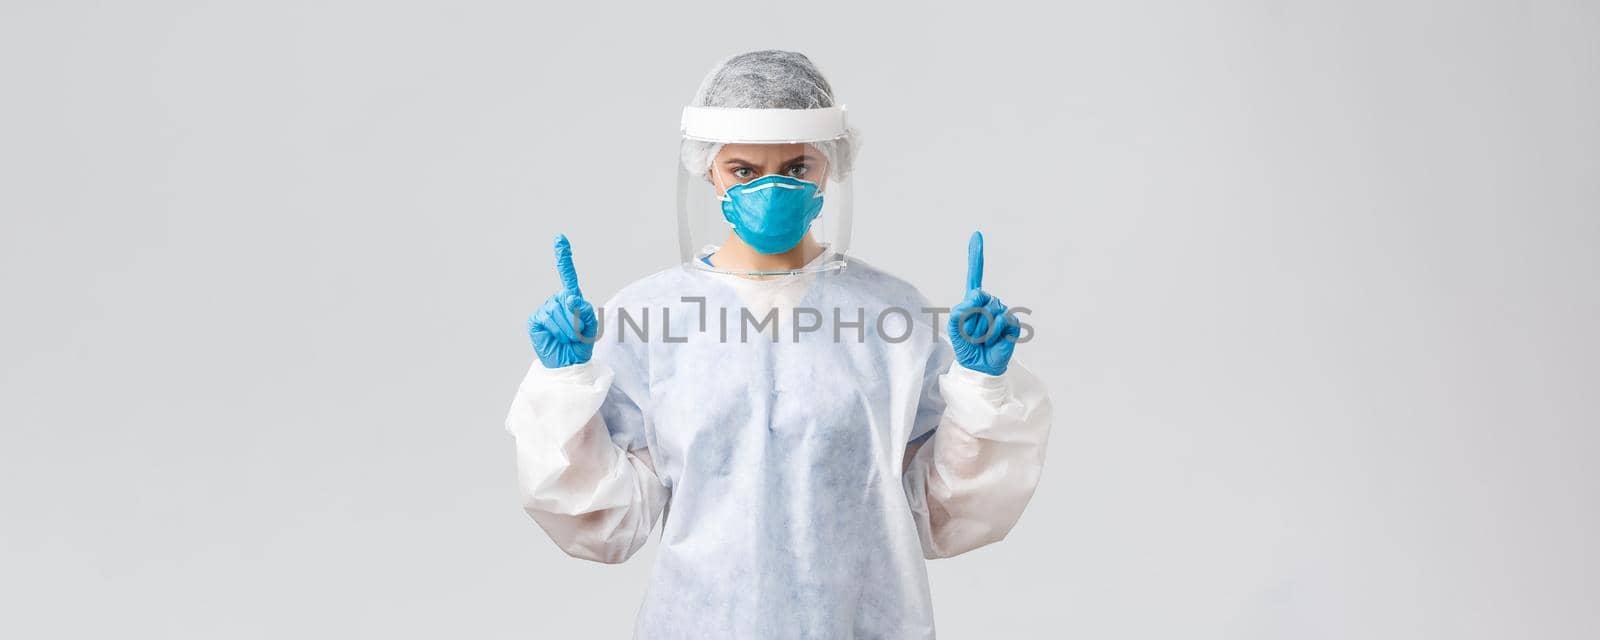 Covid-19, preventing virus, health, healthcare workers and quarantine concept. Angry confident doctor or nurse in respirator, PPE medical suit and gloves, frowning and pointing fingers up.